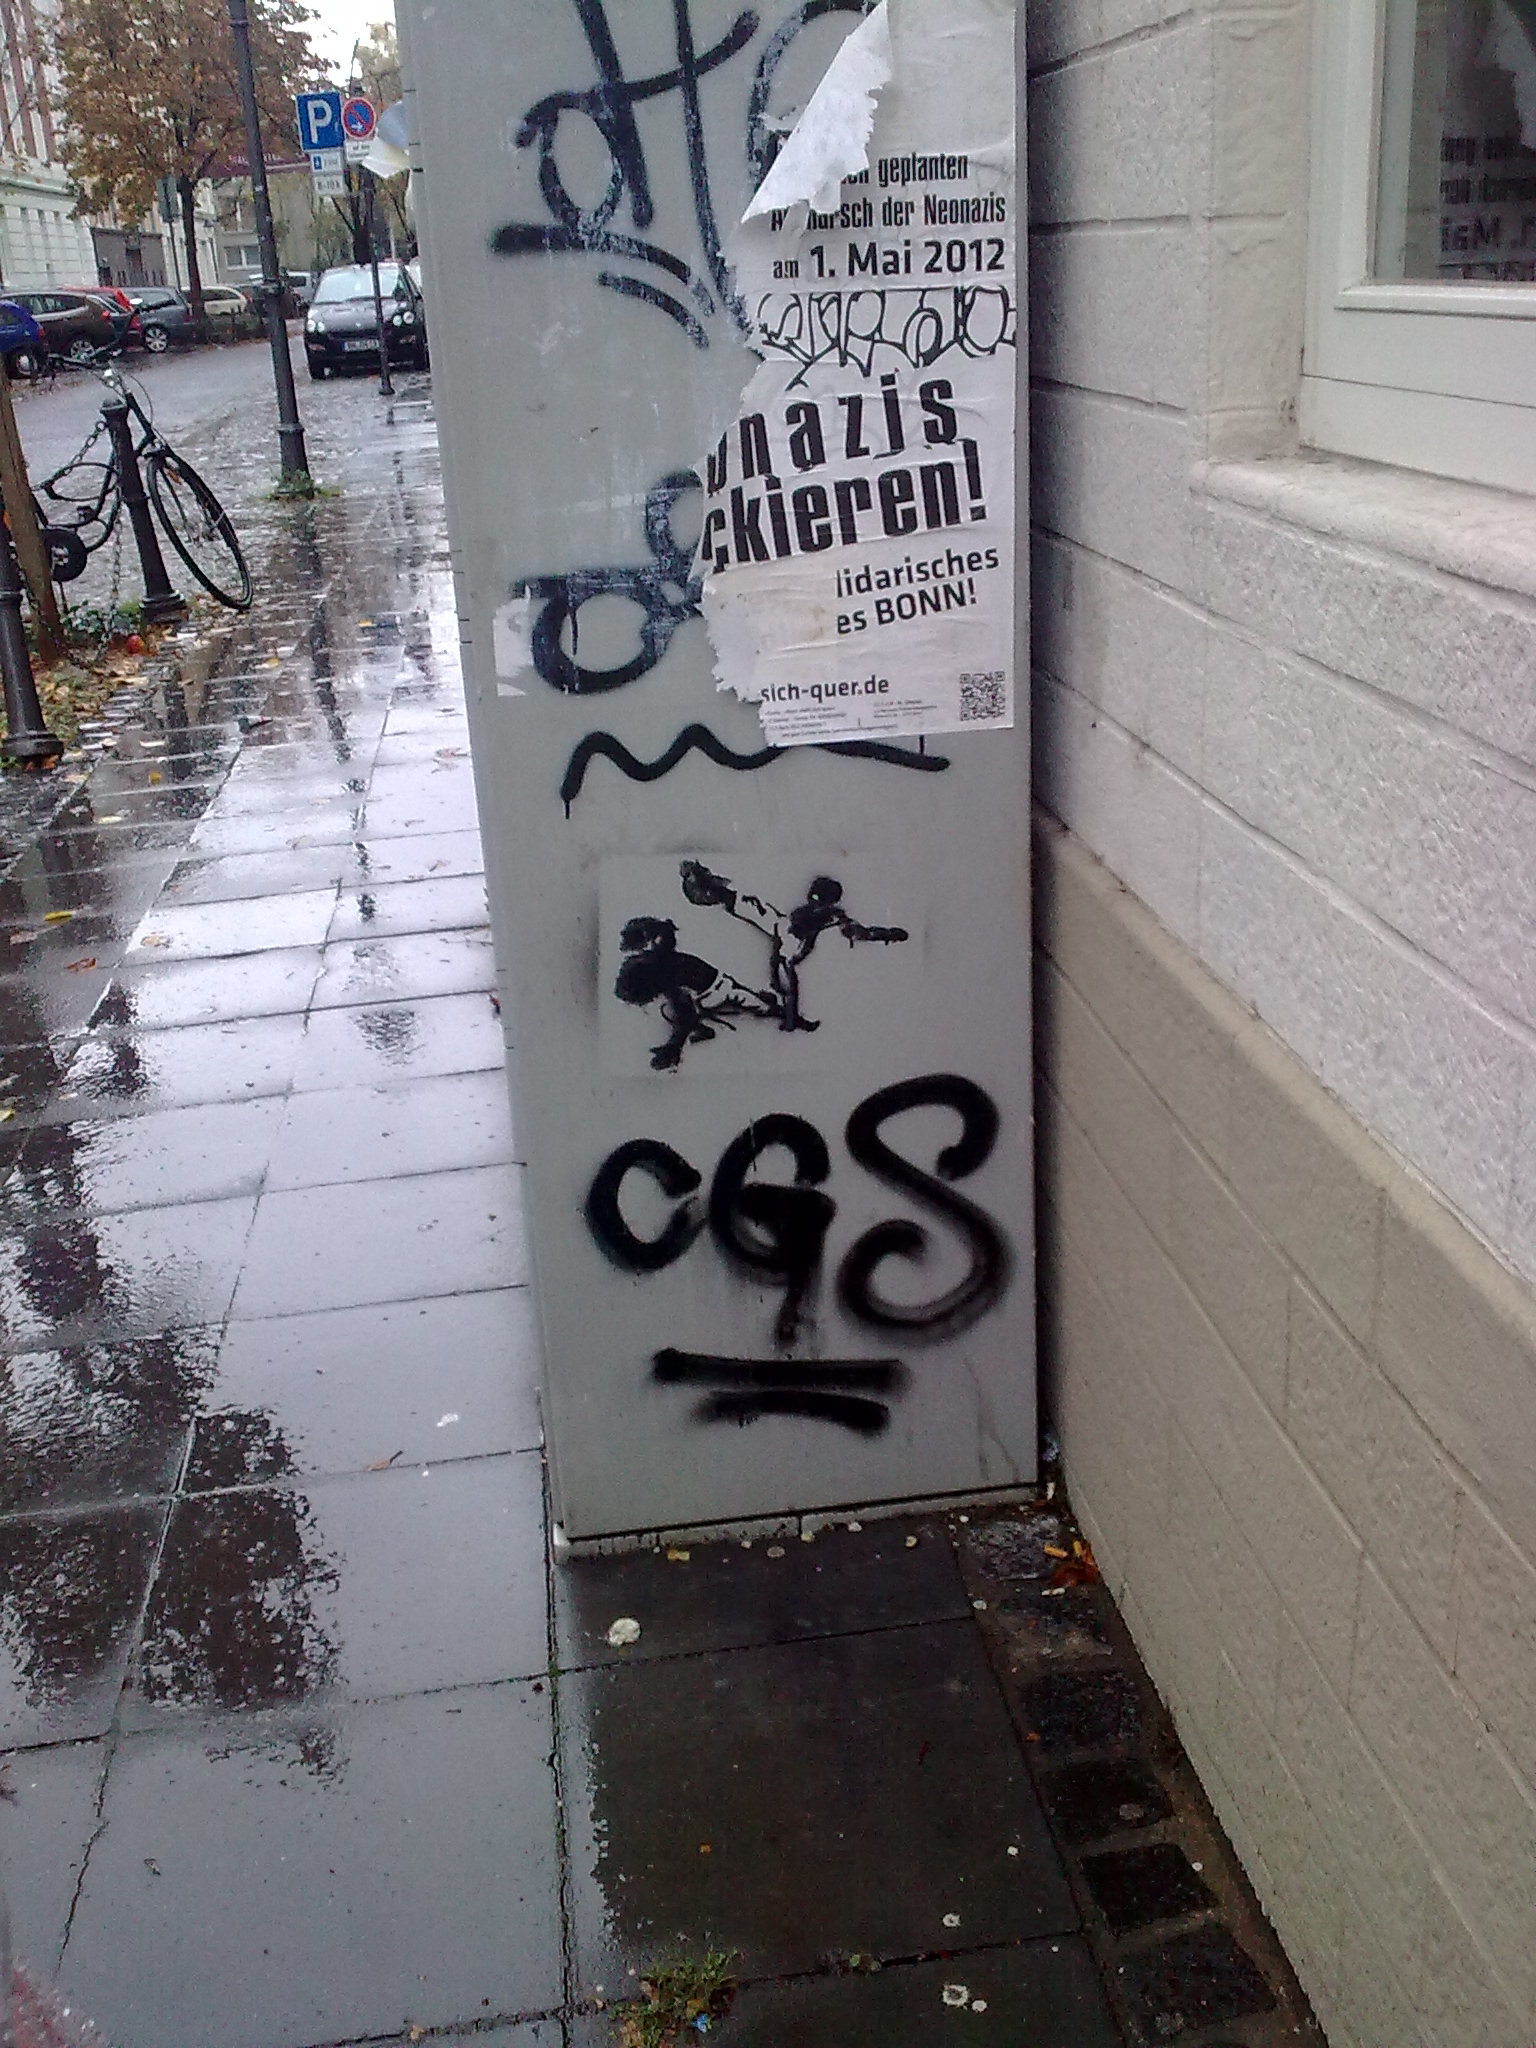 graffiti has been spray painted on an icebox